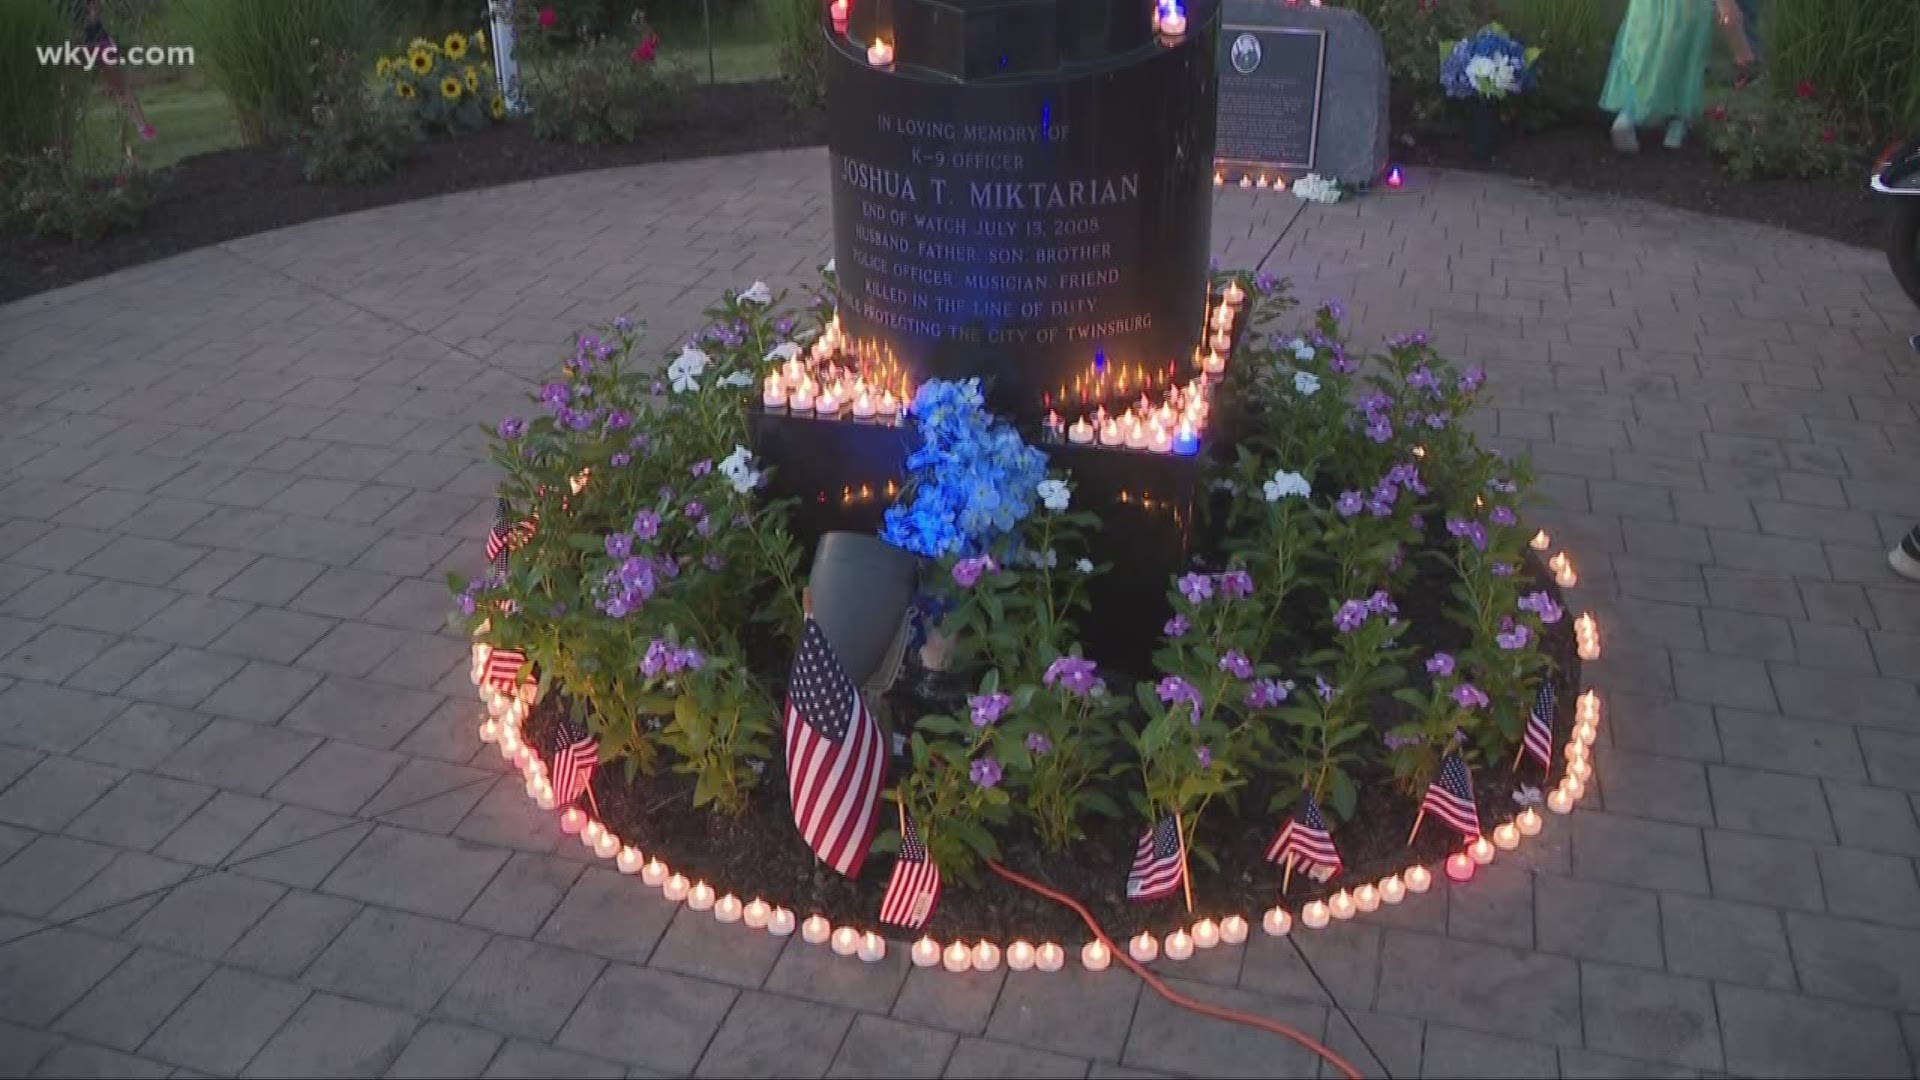 Remembrance ceremony held for fallen Twinsburg Officer Josh Miktarian